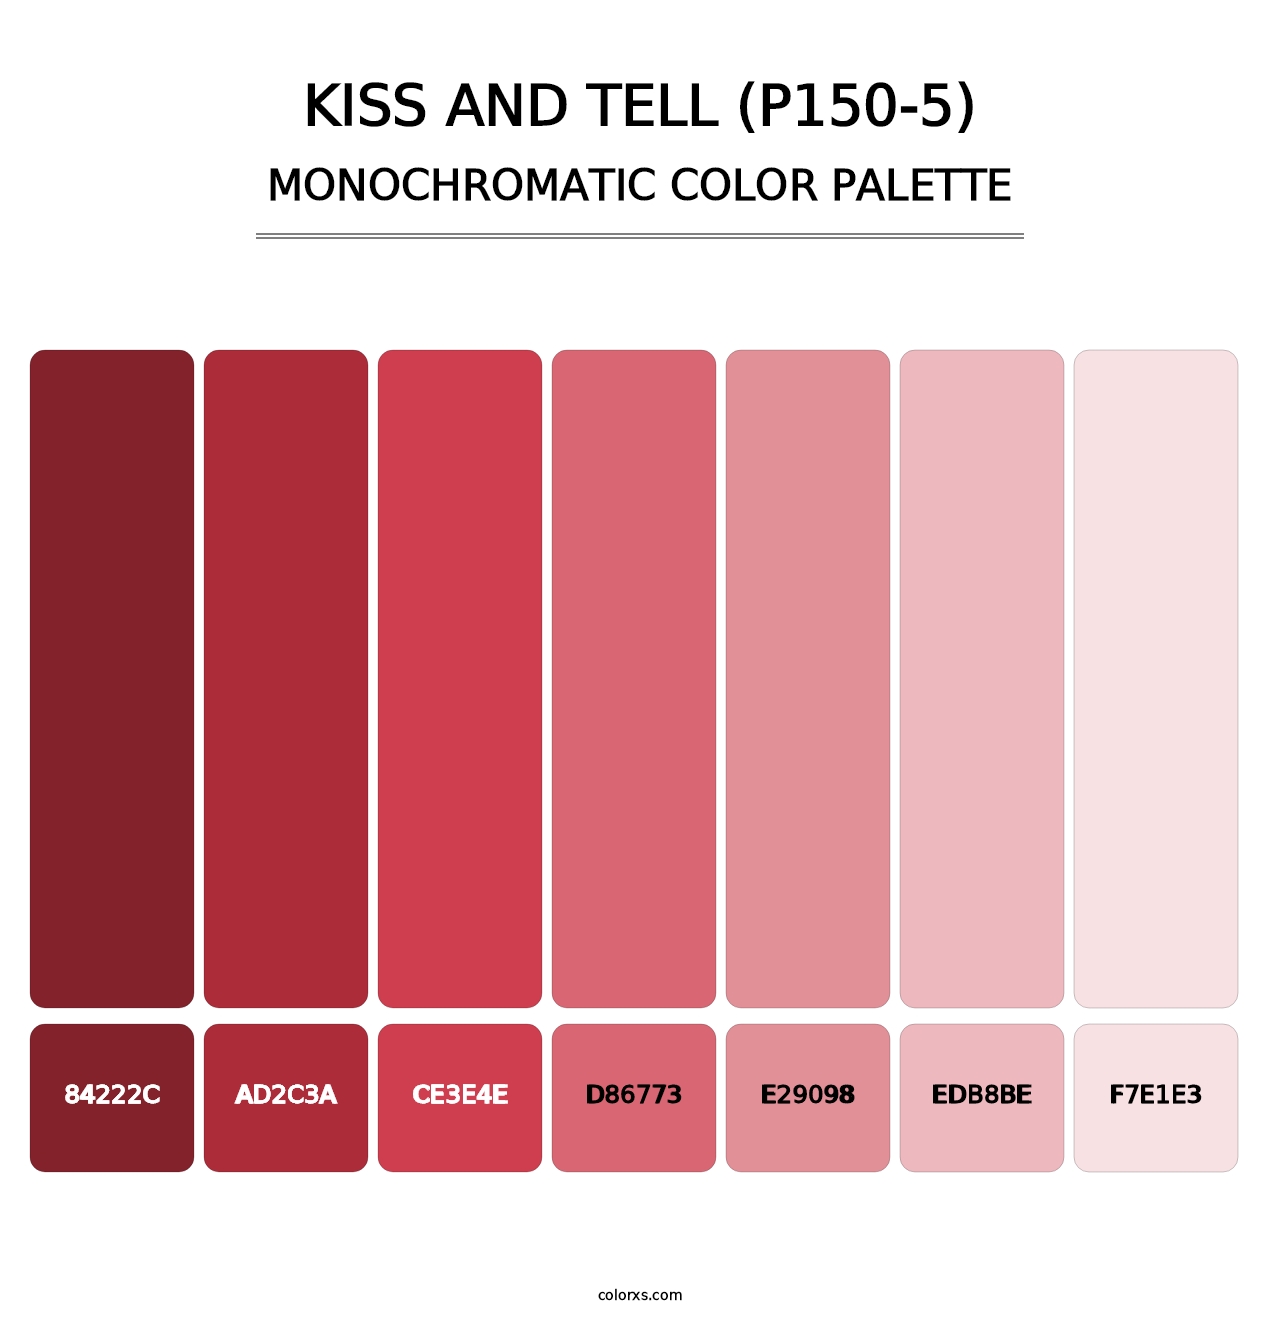 Kiss And Tell (P150-5) - Monochromatic Color Palette